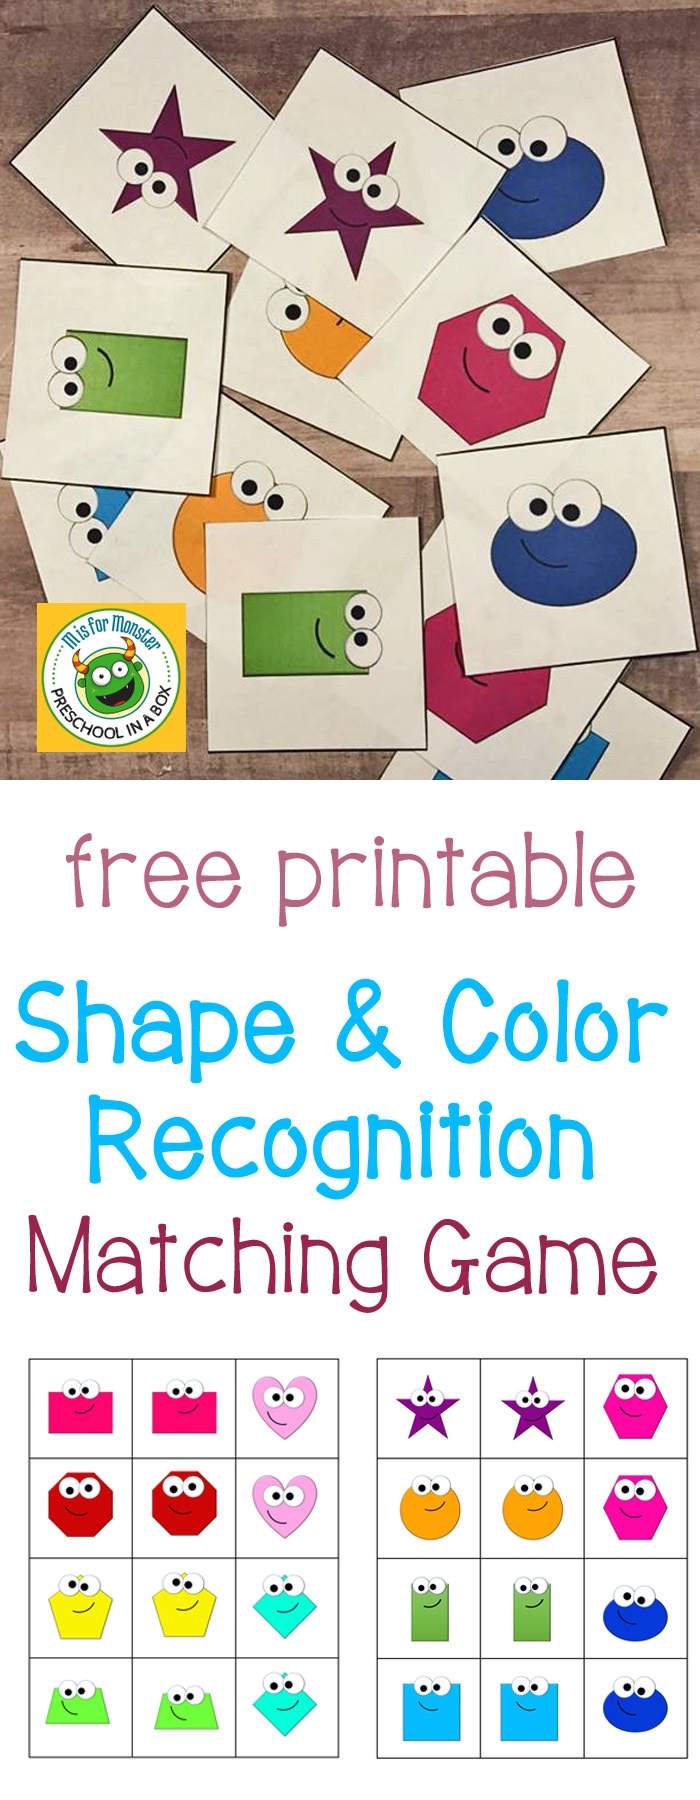 Shape And Color Recognition Matching Game Free Printable - Free Printable Matching Cards